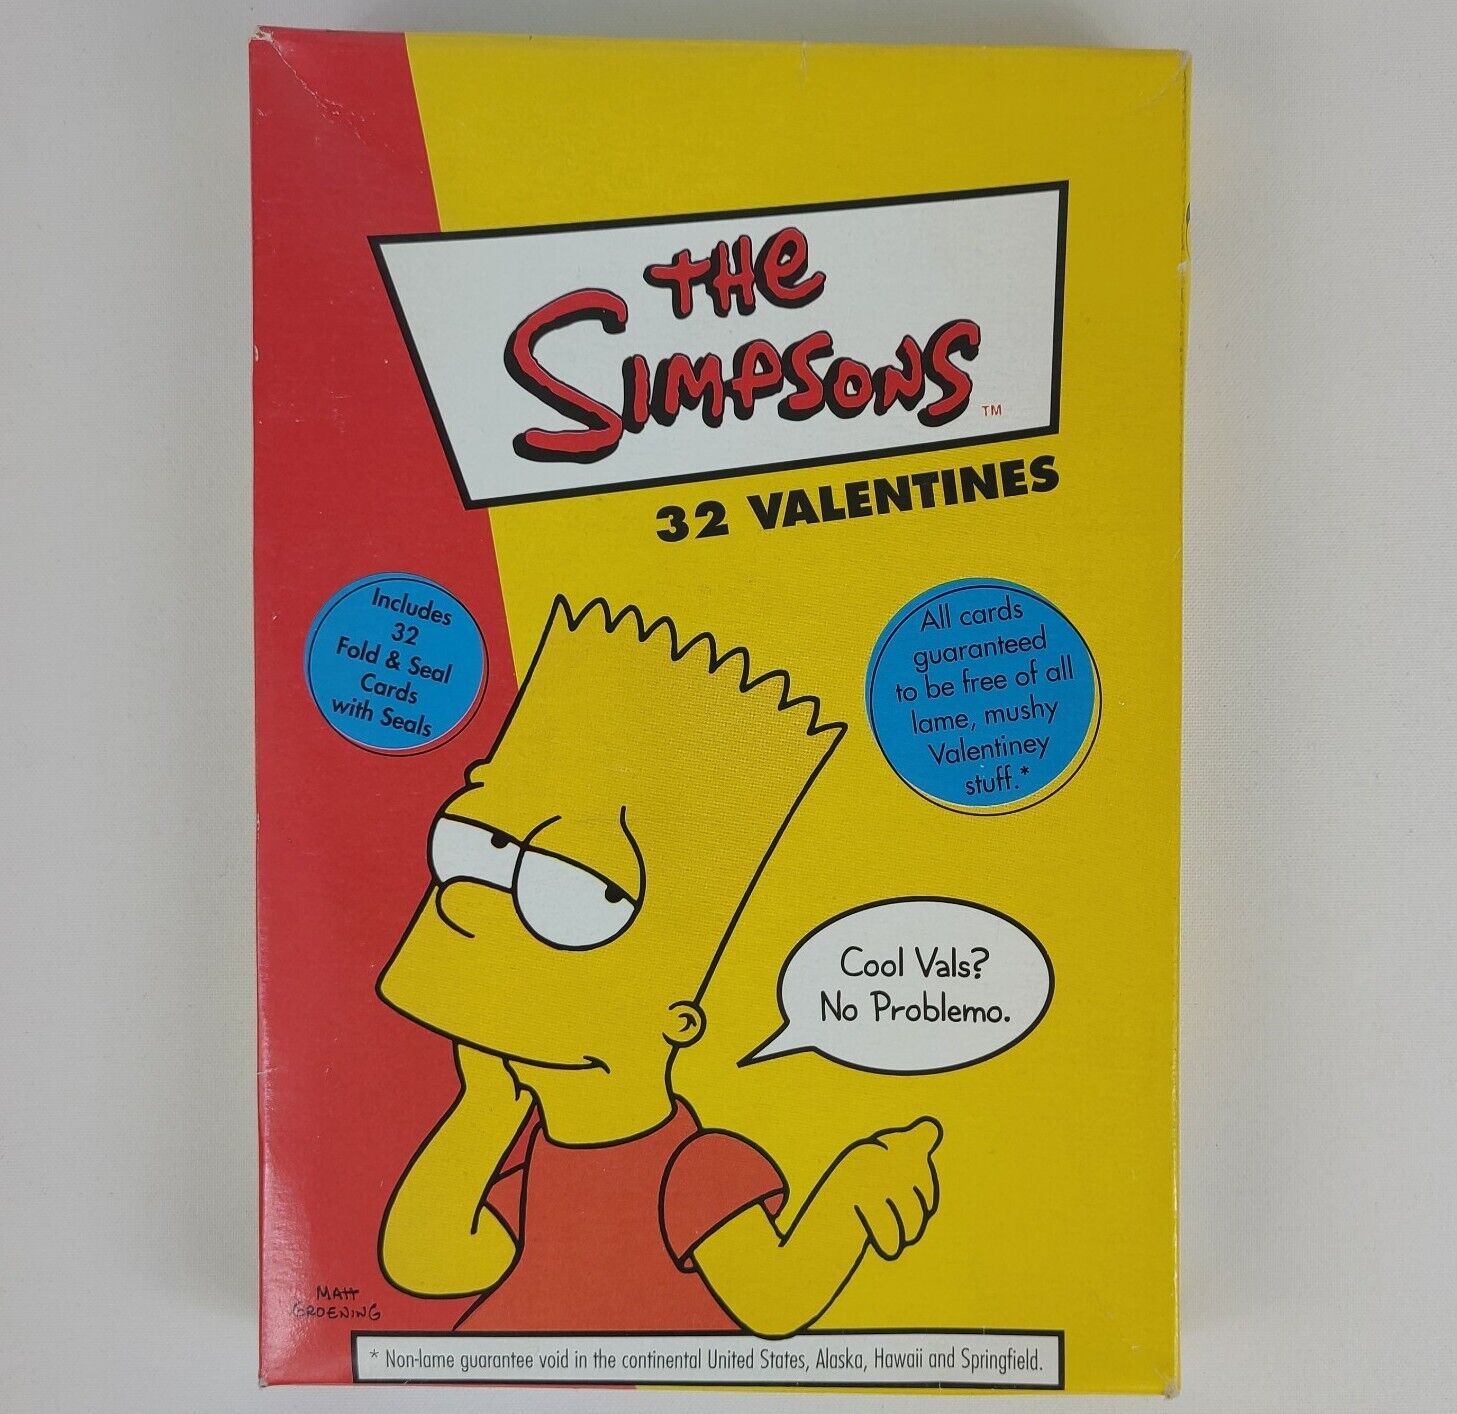 The Simpsons Valentine's Day Cards - 32 New In Box 2002 Vintage Cards